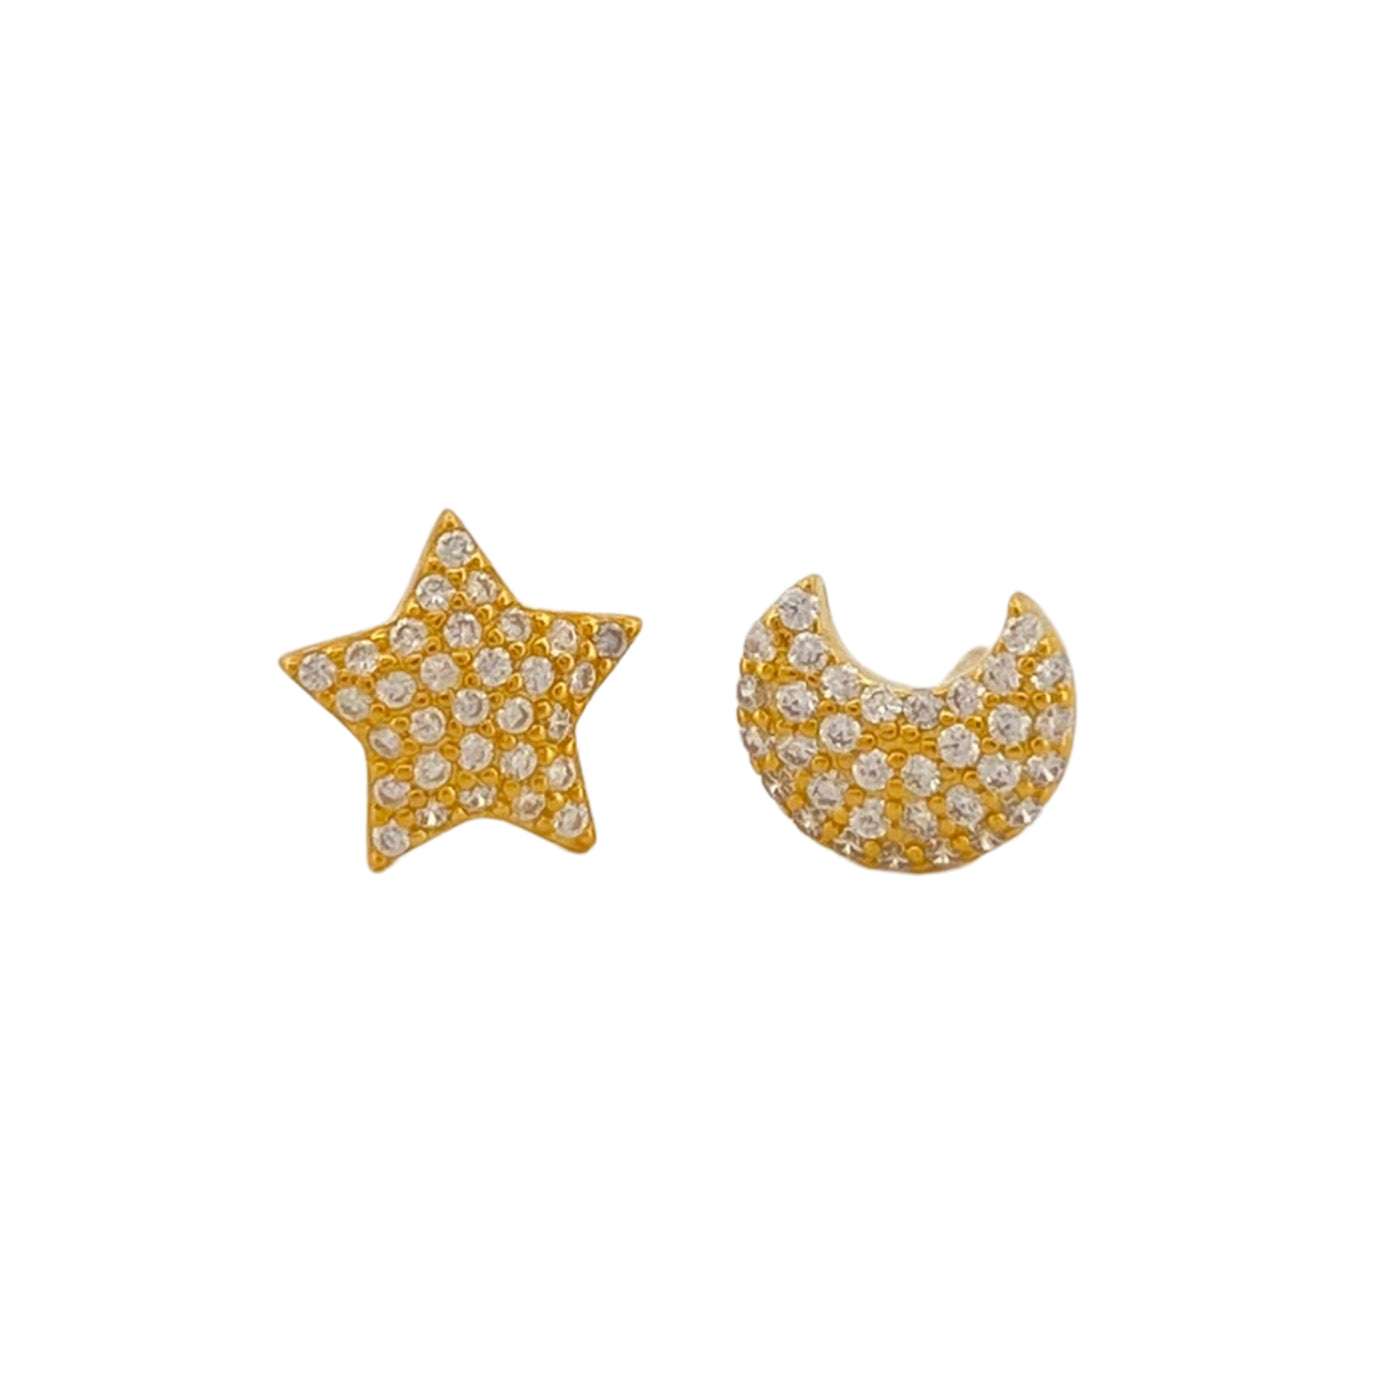 Silver star and moon earrings with cubic zirconia - 8 mm